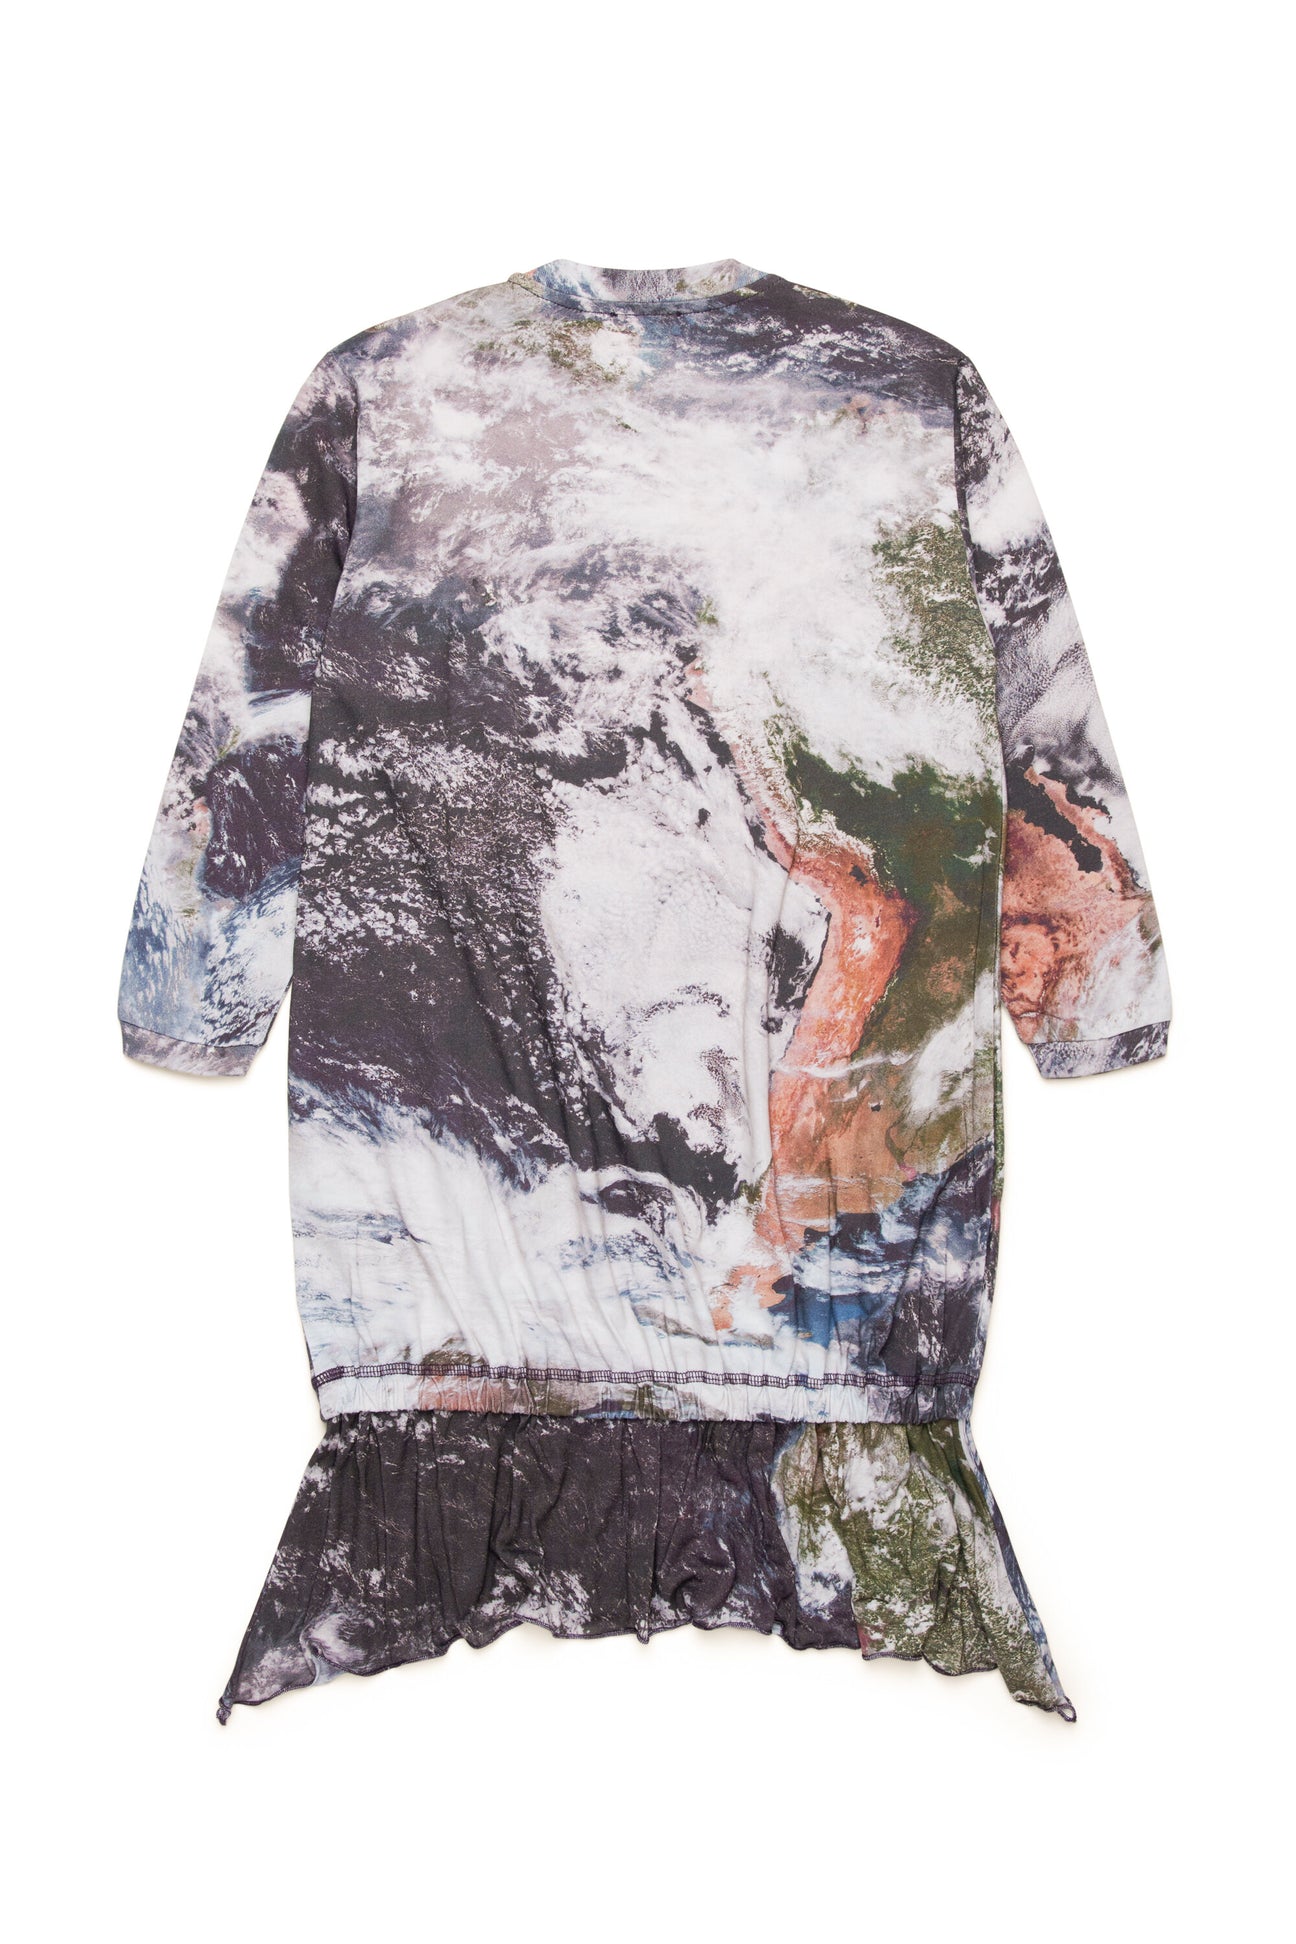 All-over Planet Camou dress All-over Planet Camou dress